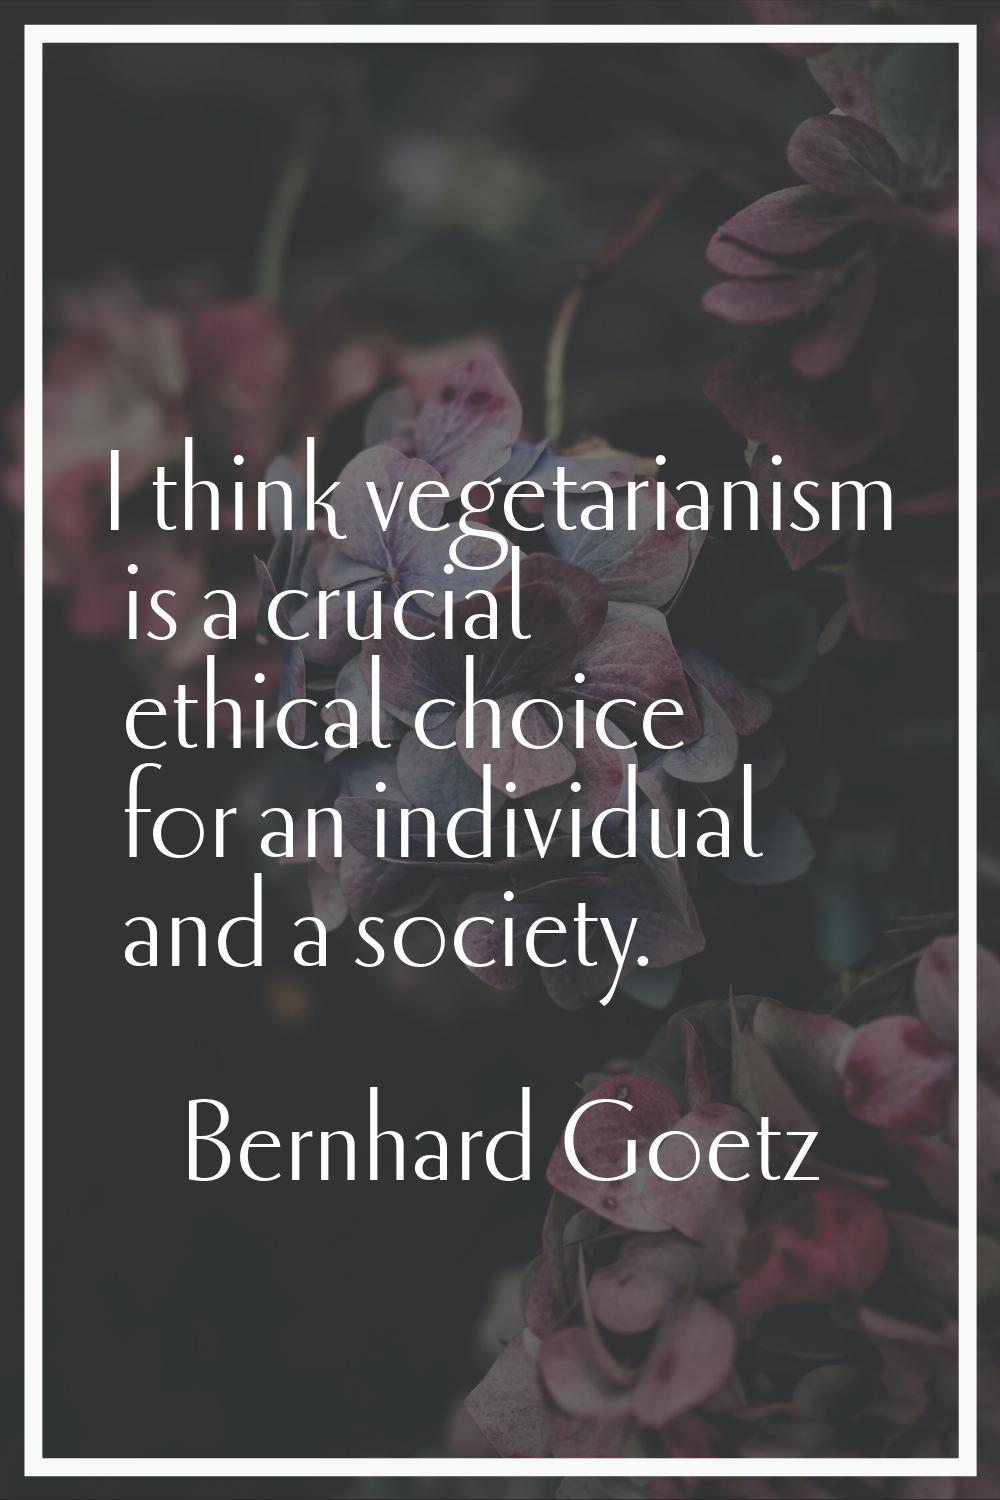 I think vegetarianism is a crucial ethical choice for an individual and a society.